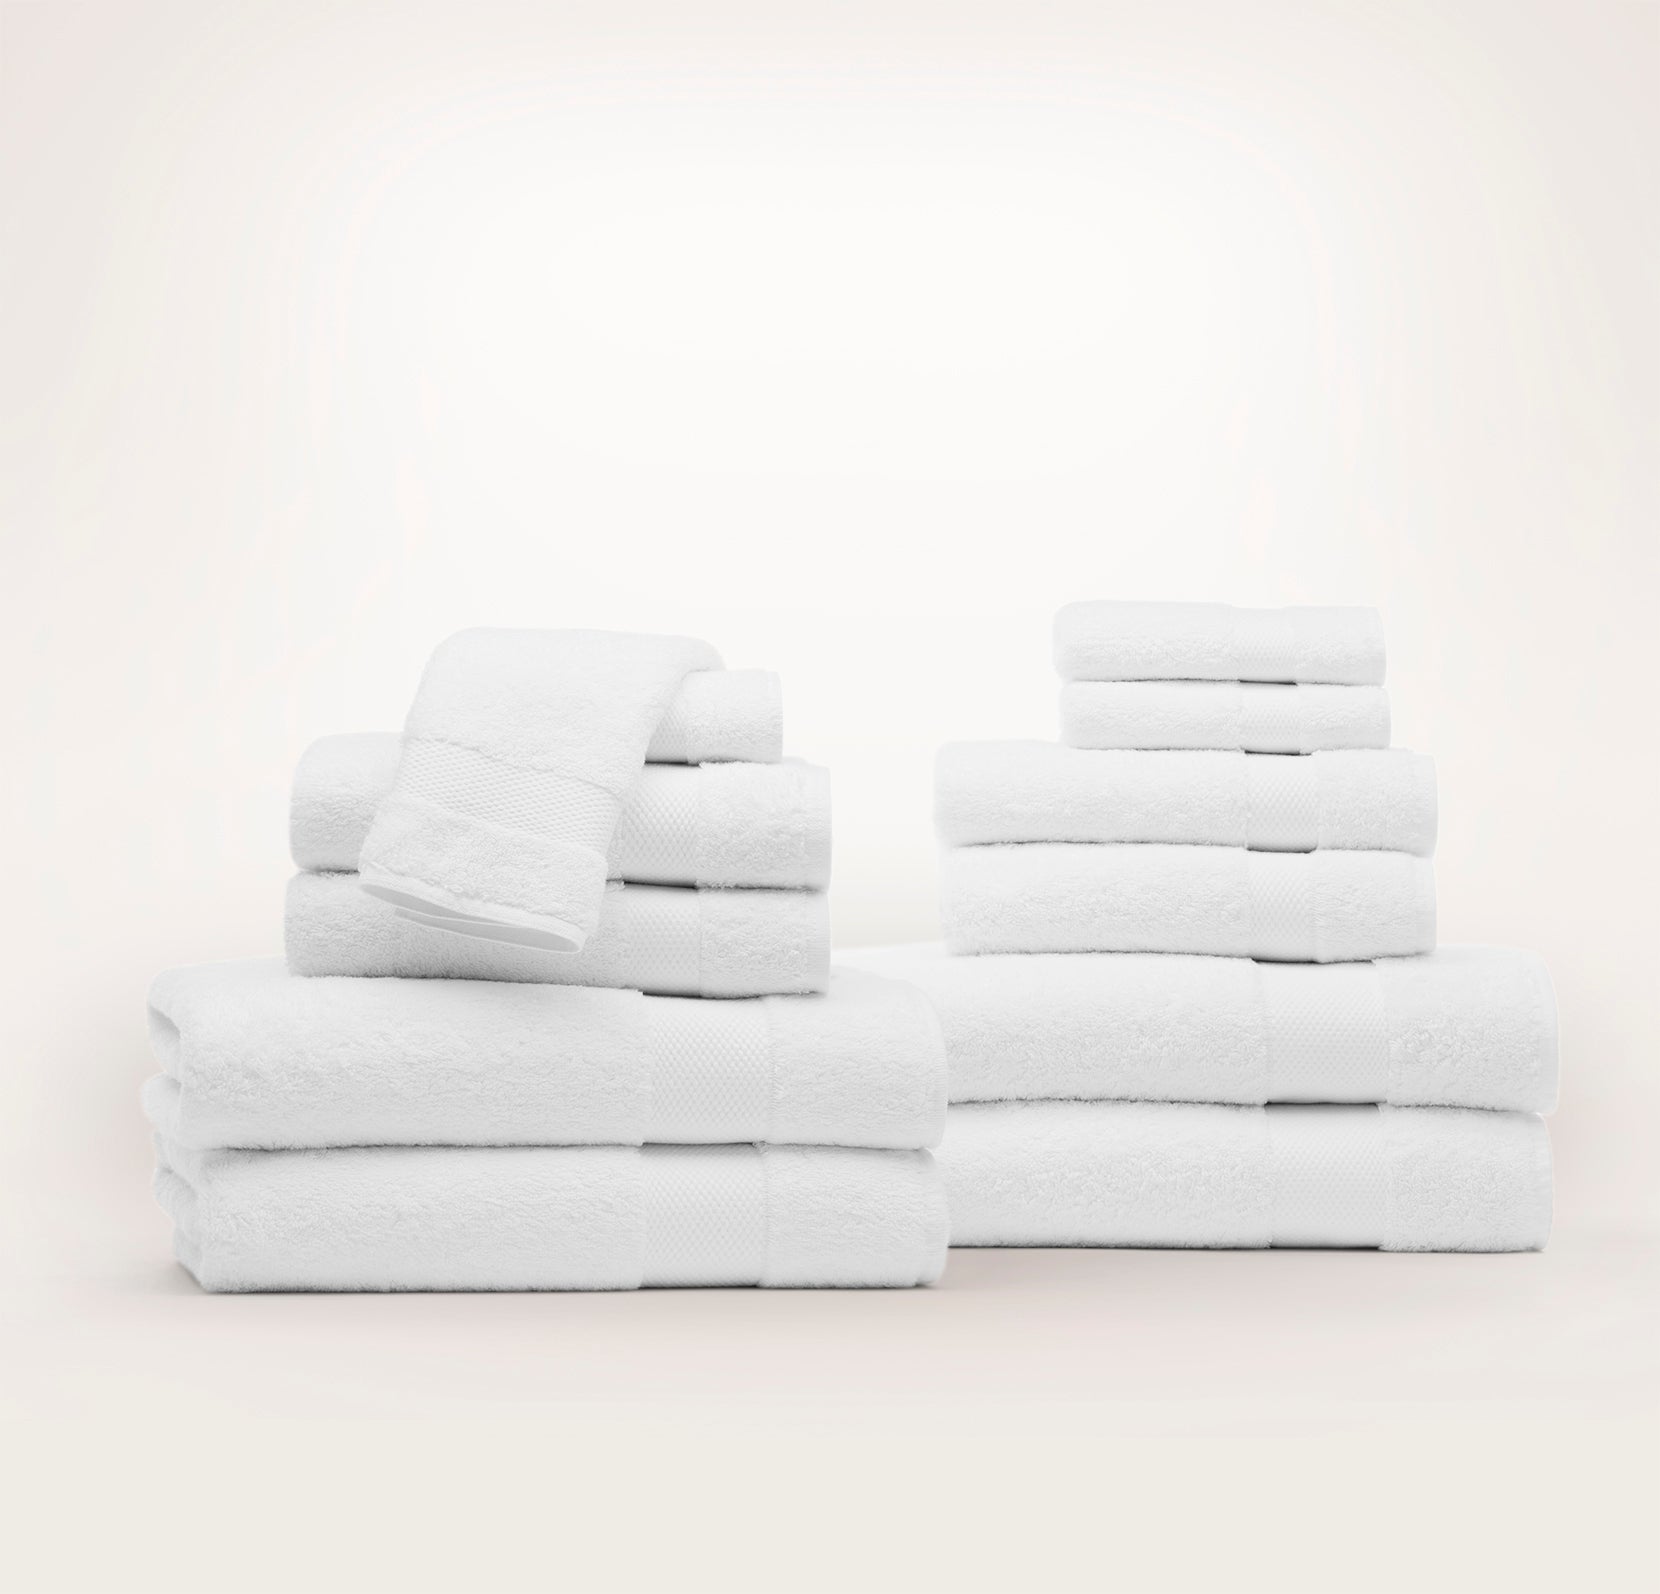 How to Add Loops to Bath Towels